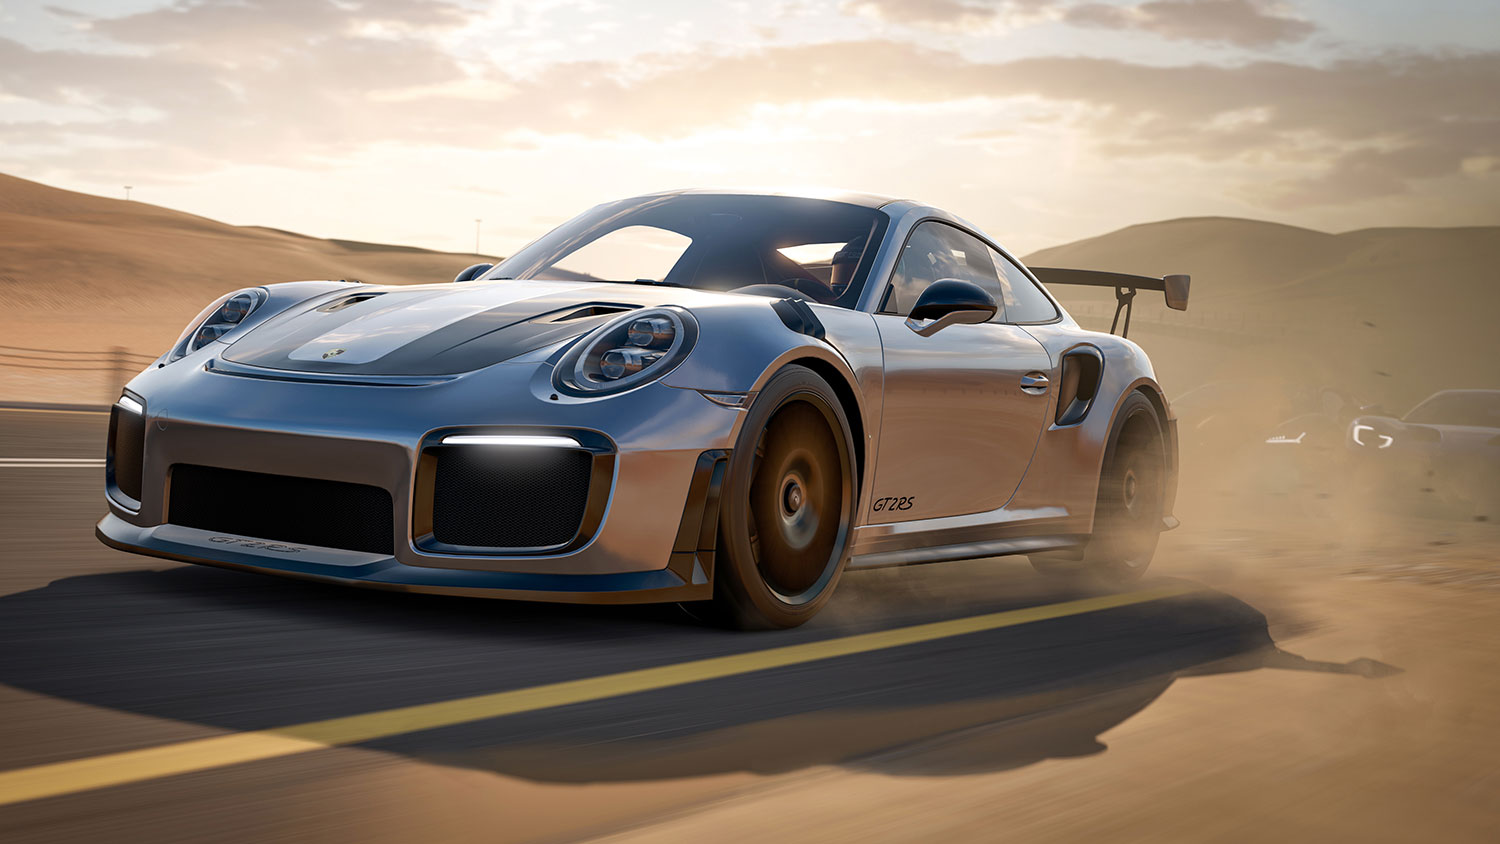 Forza Horizon 5 hands-on: The fast and the familiar - CNET